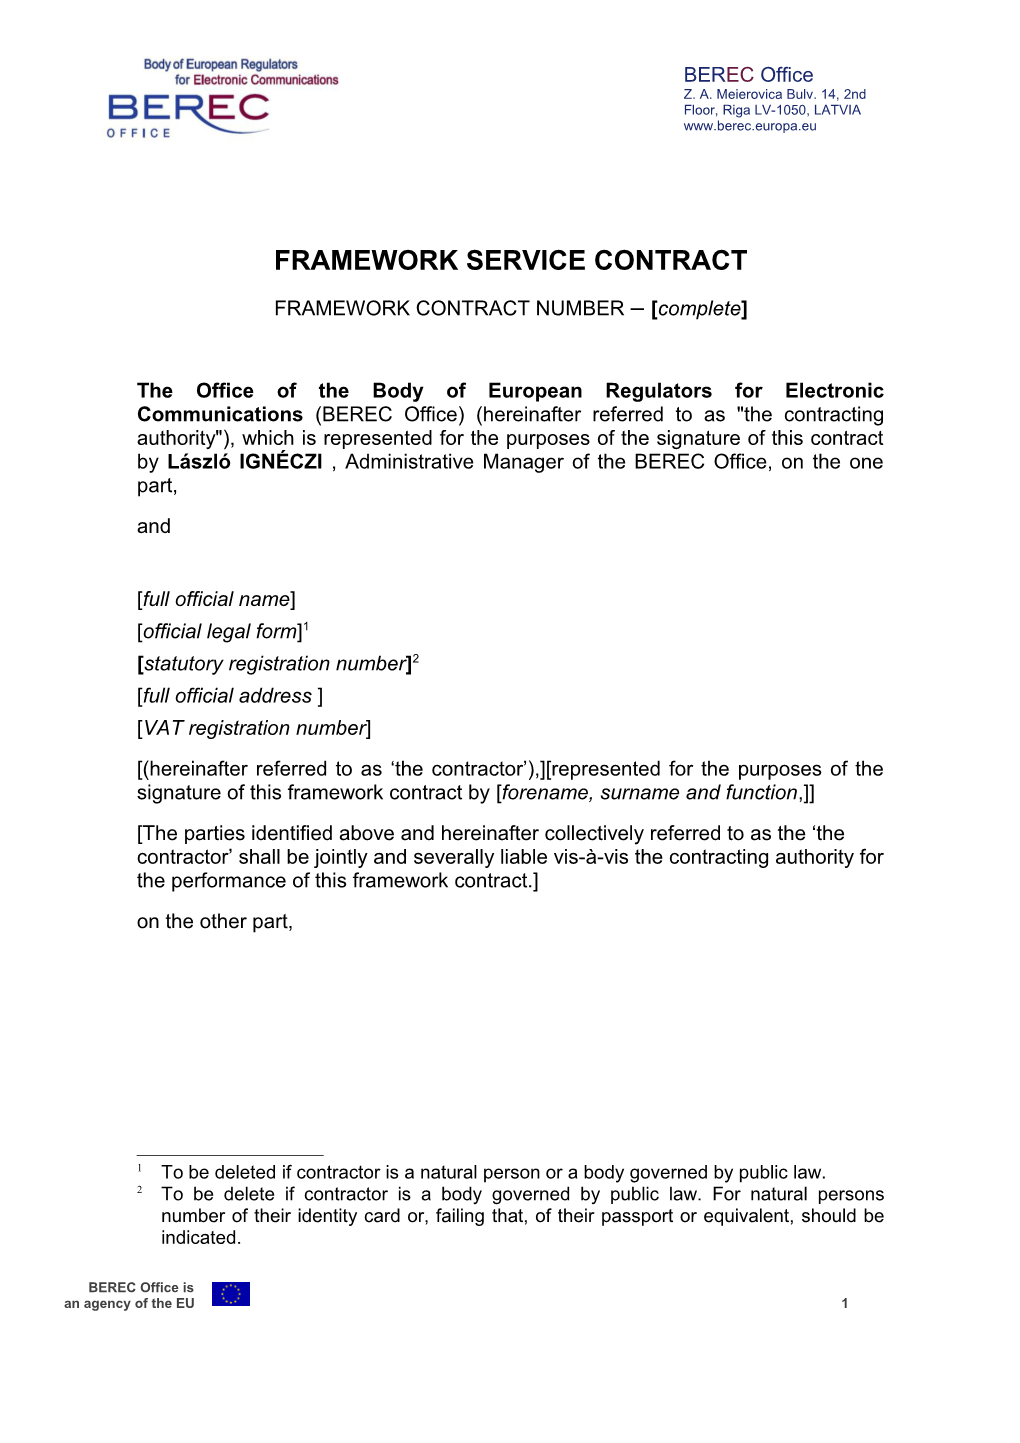 Multiple Framework Contract in Cascade for the Provision of Professional Event Organisation